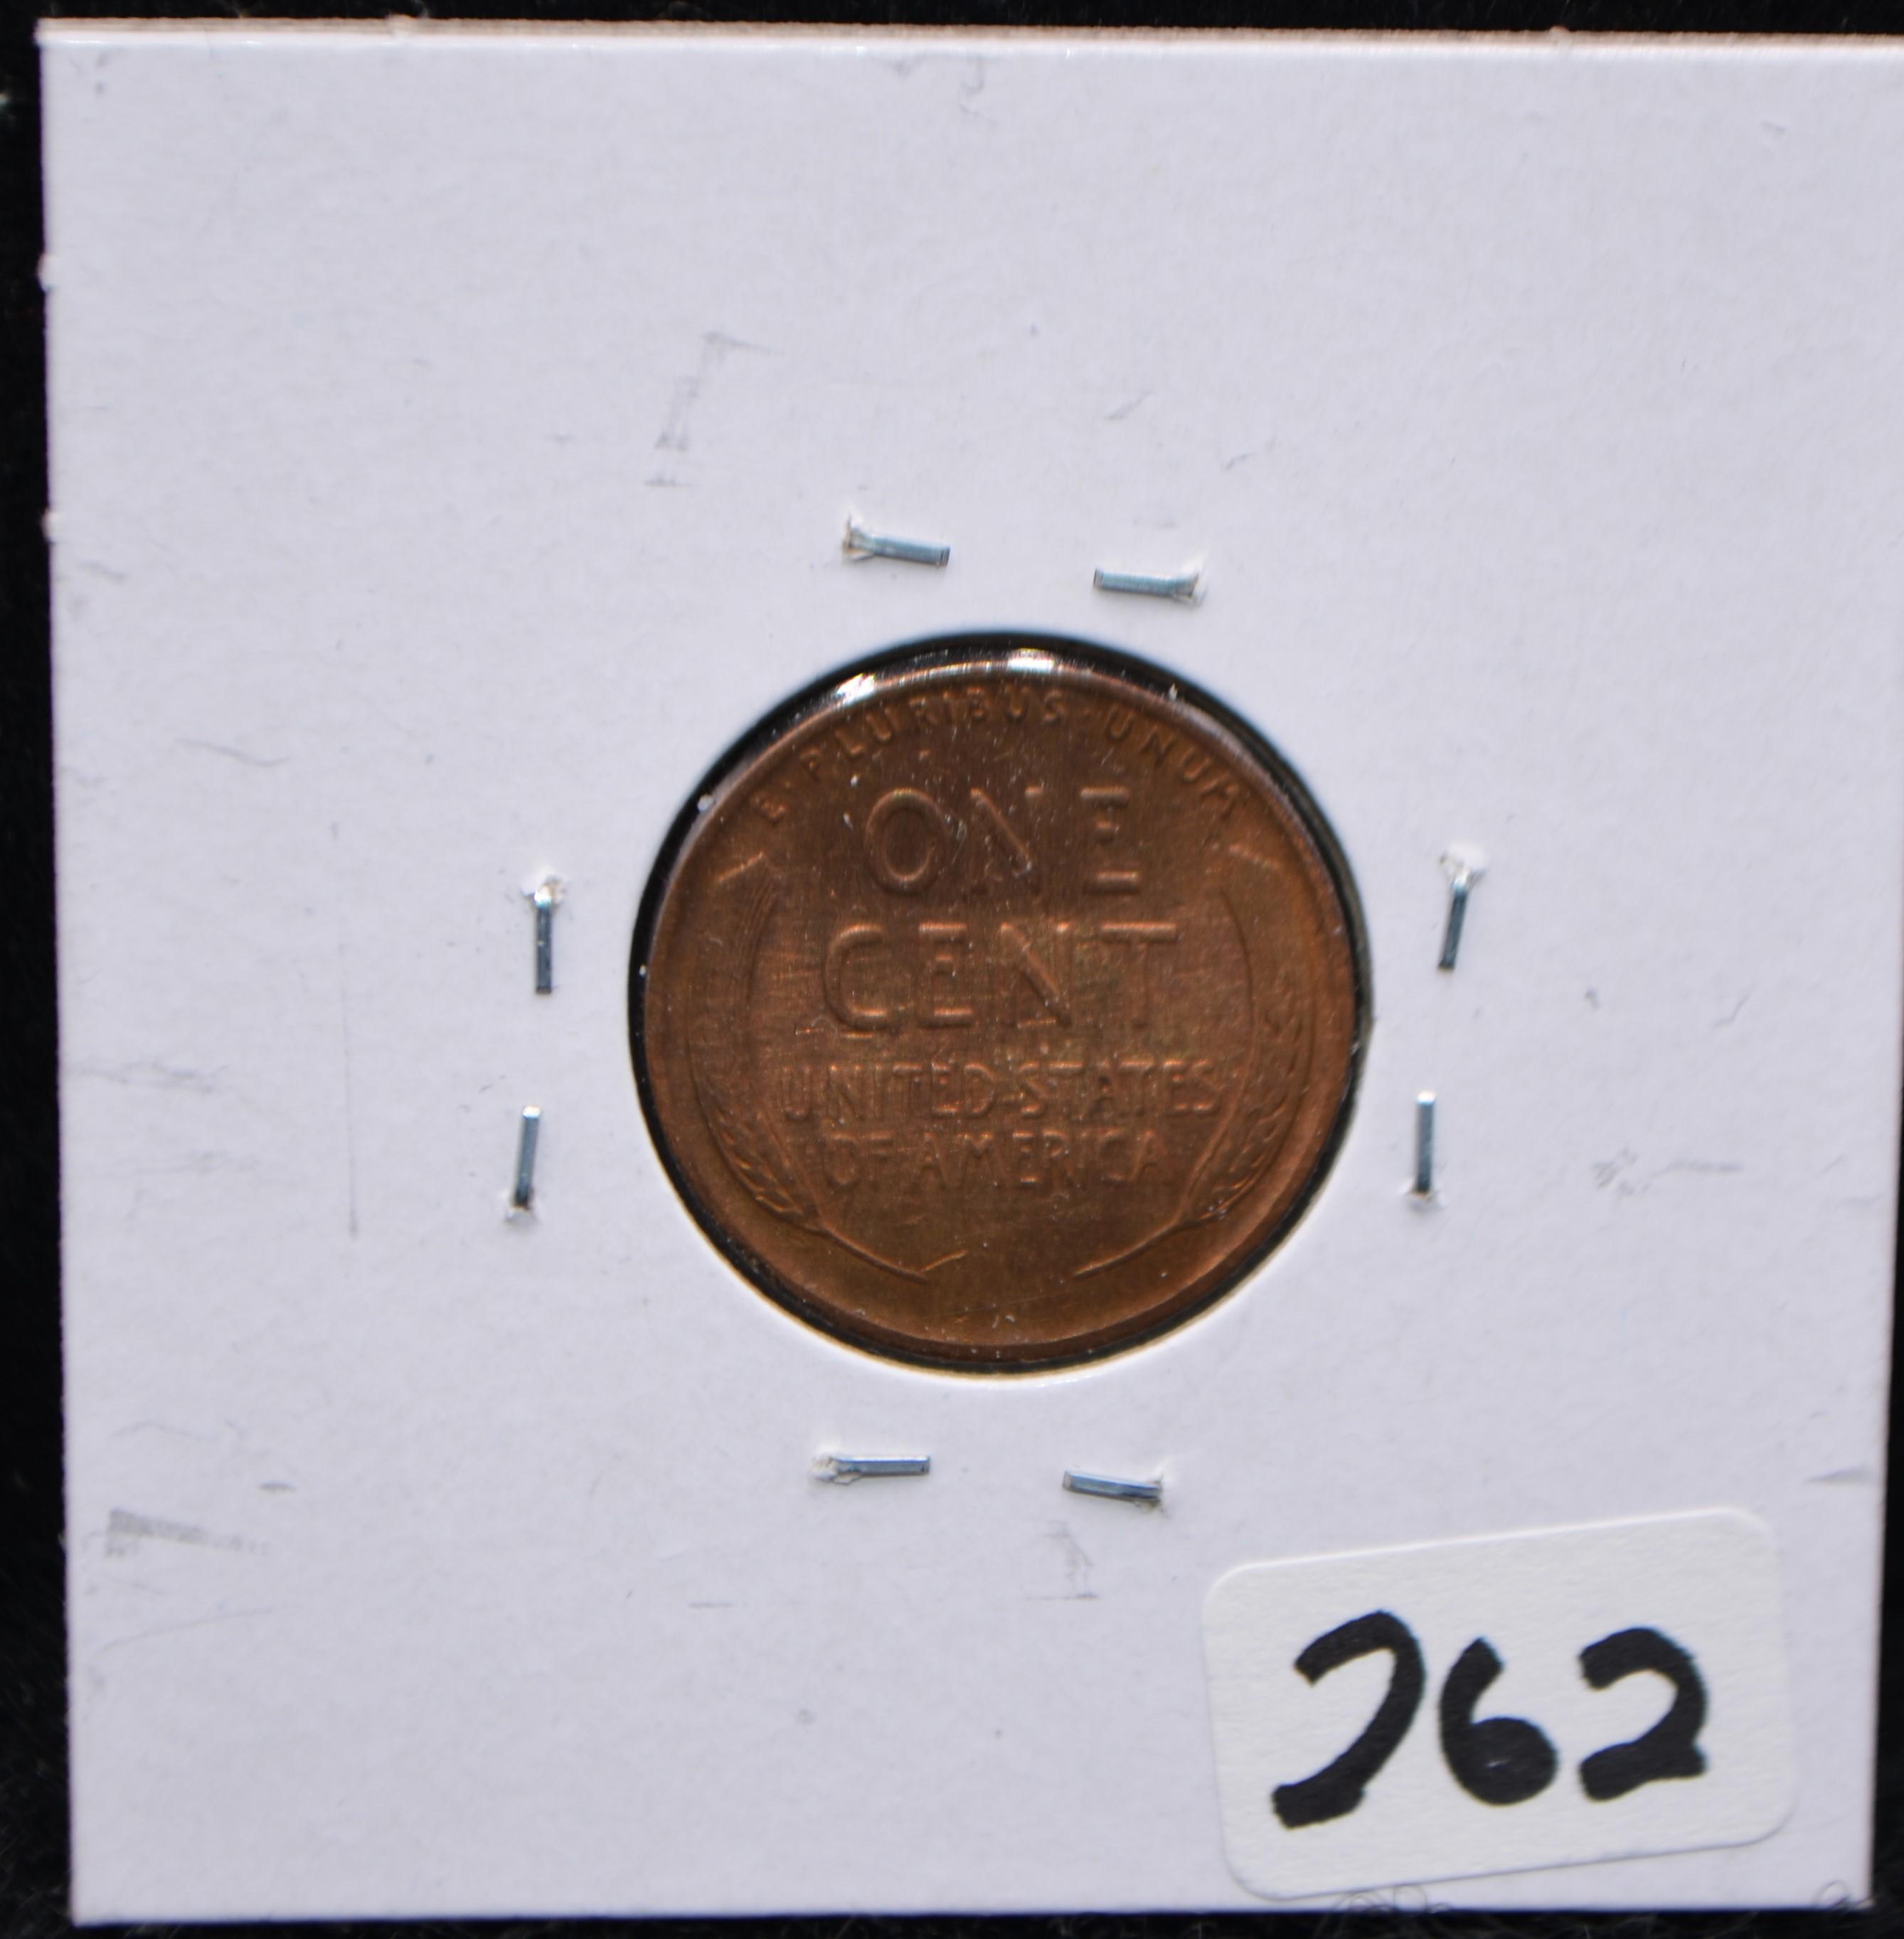 KEY 1931-S LINCOLN WHEAT PENNY